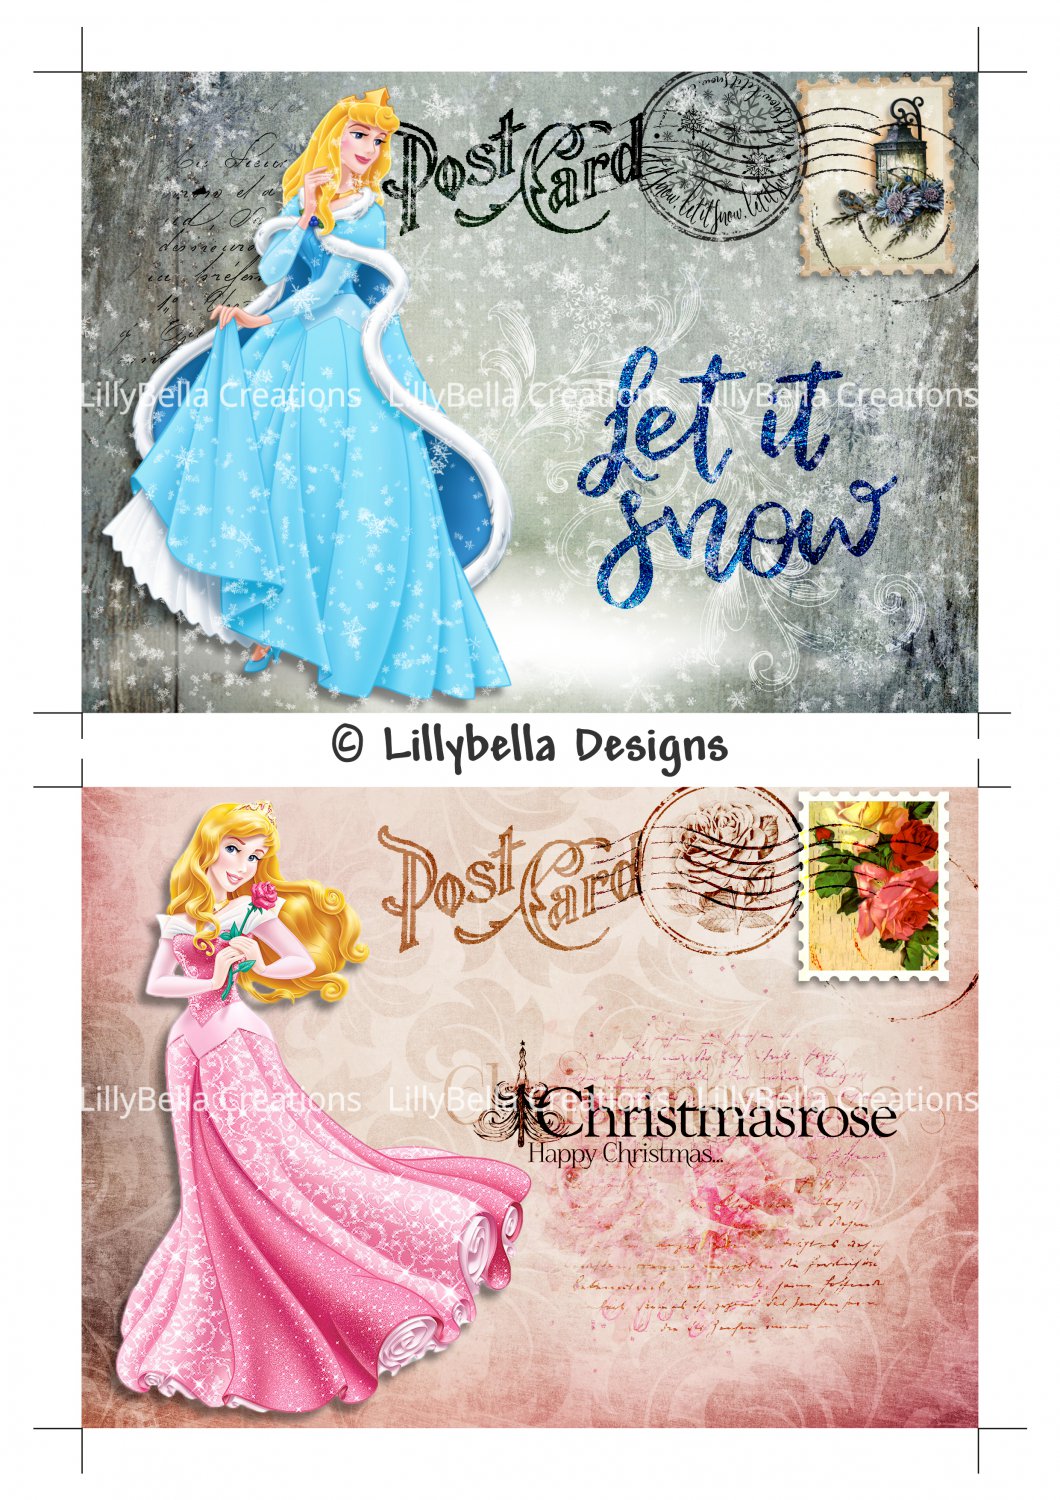 Christmas Aurora ~ Sleeping Beauty - 5 x 7 inch Color Postcards - Vintage Style - 2 total